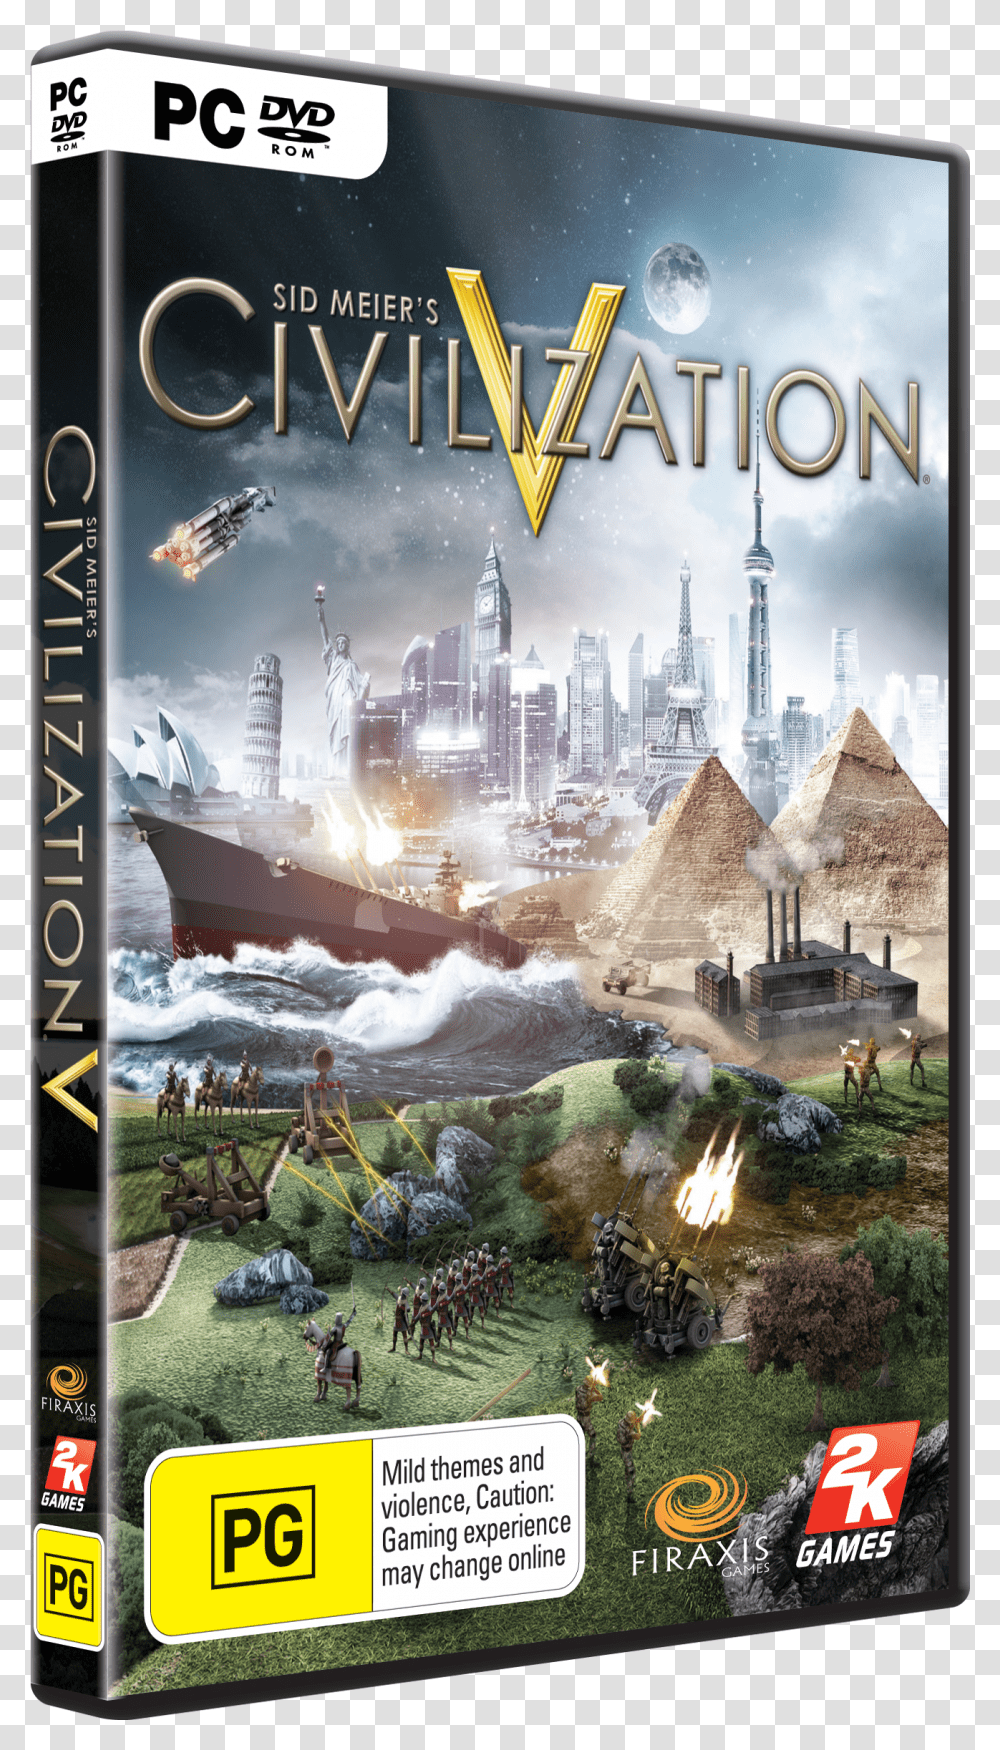 Who Wants A Copy Of Civilization V And Some Civ Gear Civilization V Package Transparent Png